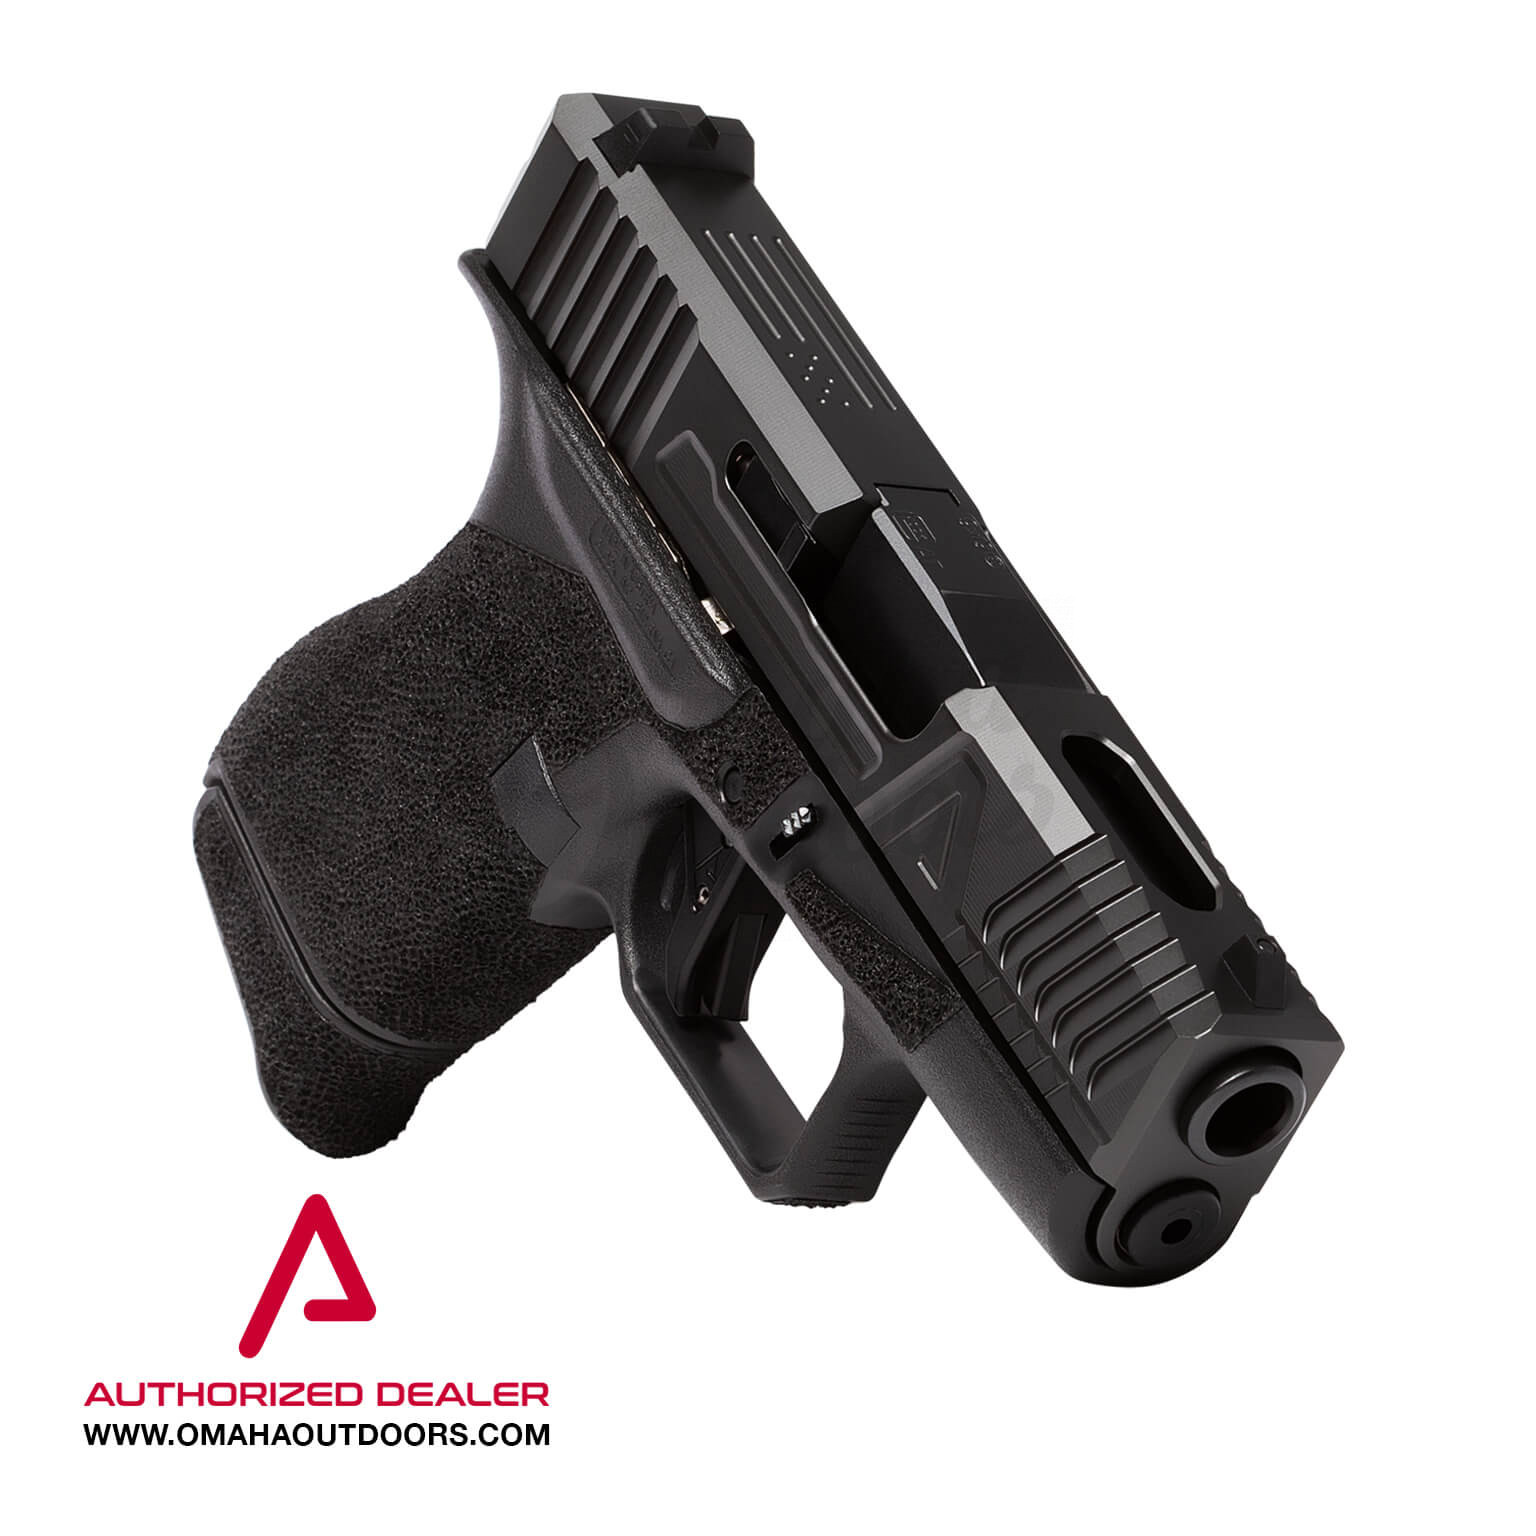 Agency Arms Glock 43 Hybrid Special Pistol 9mm 6, 7 RD AA-G43-HS